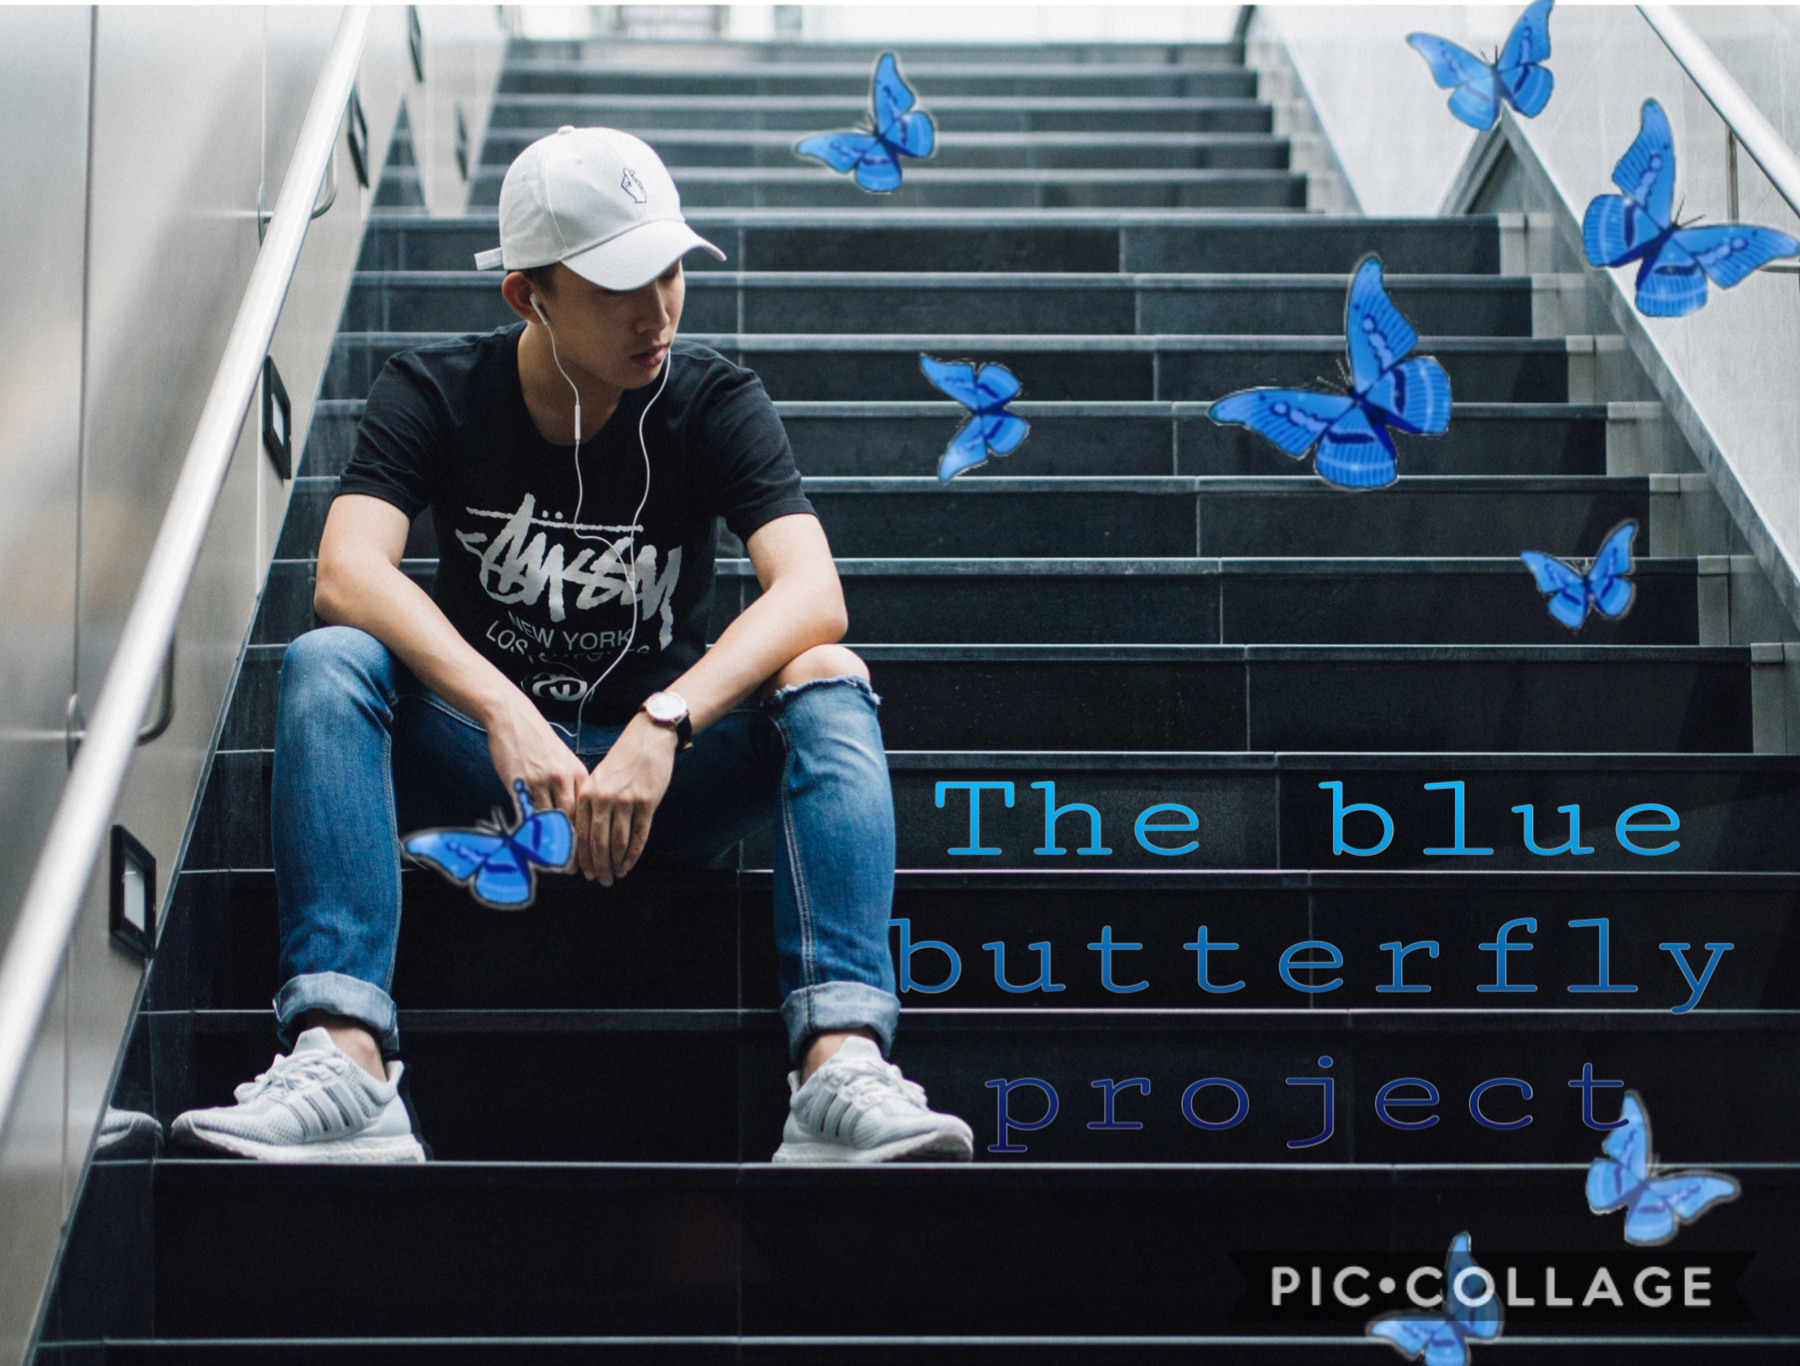 Welcome to the blue butterfly project 🦋click🦋

This is a page for spreading positivity and light, be the person that brings a smile to someone’s face